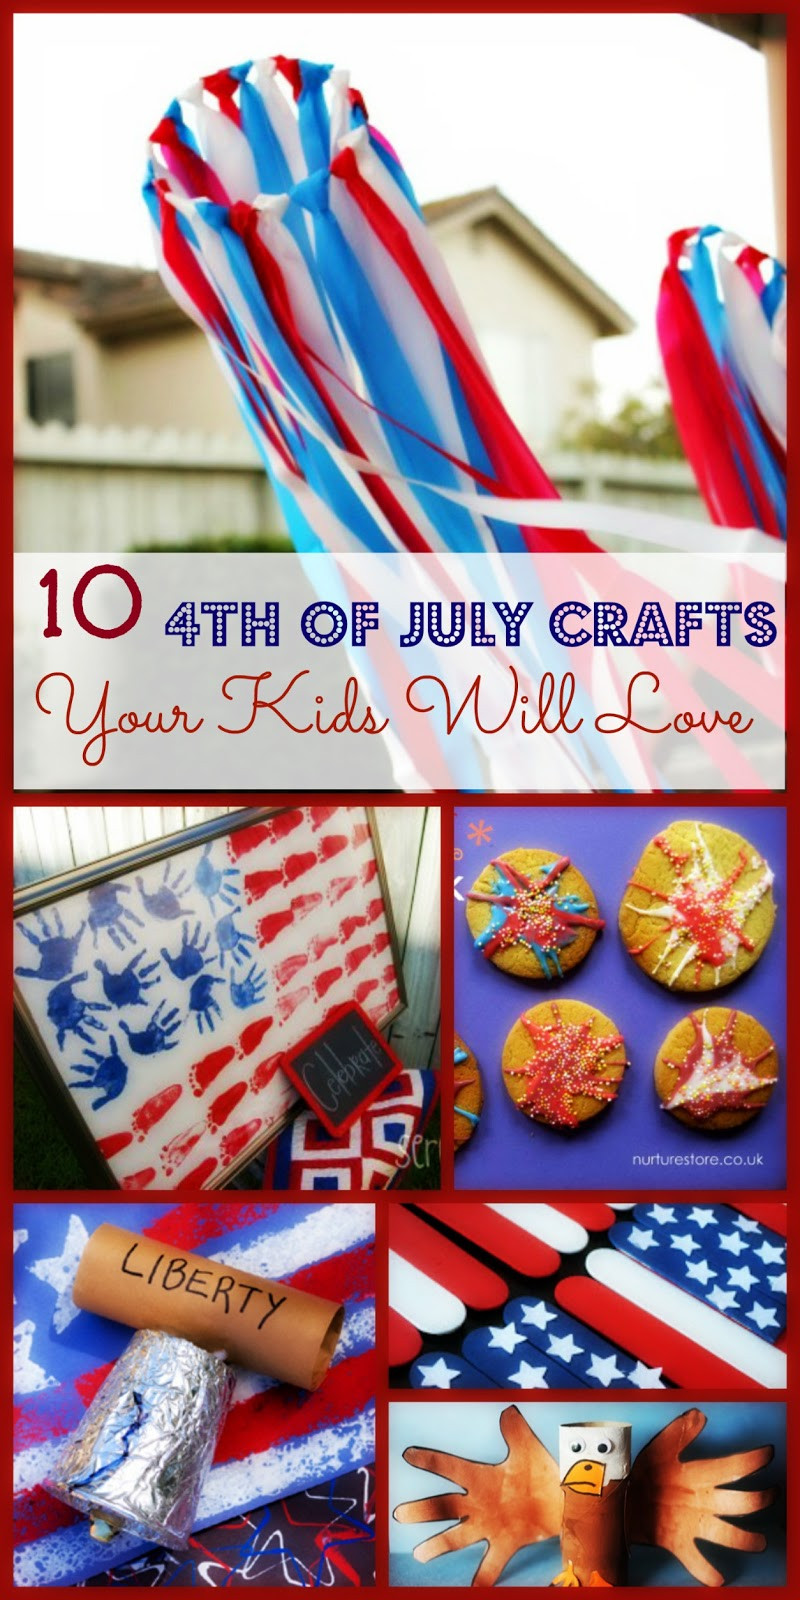 4th Of July Kids Crafts
 10 Kid Friendly 4th of July DIY Crafts